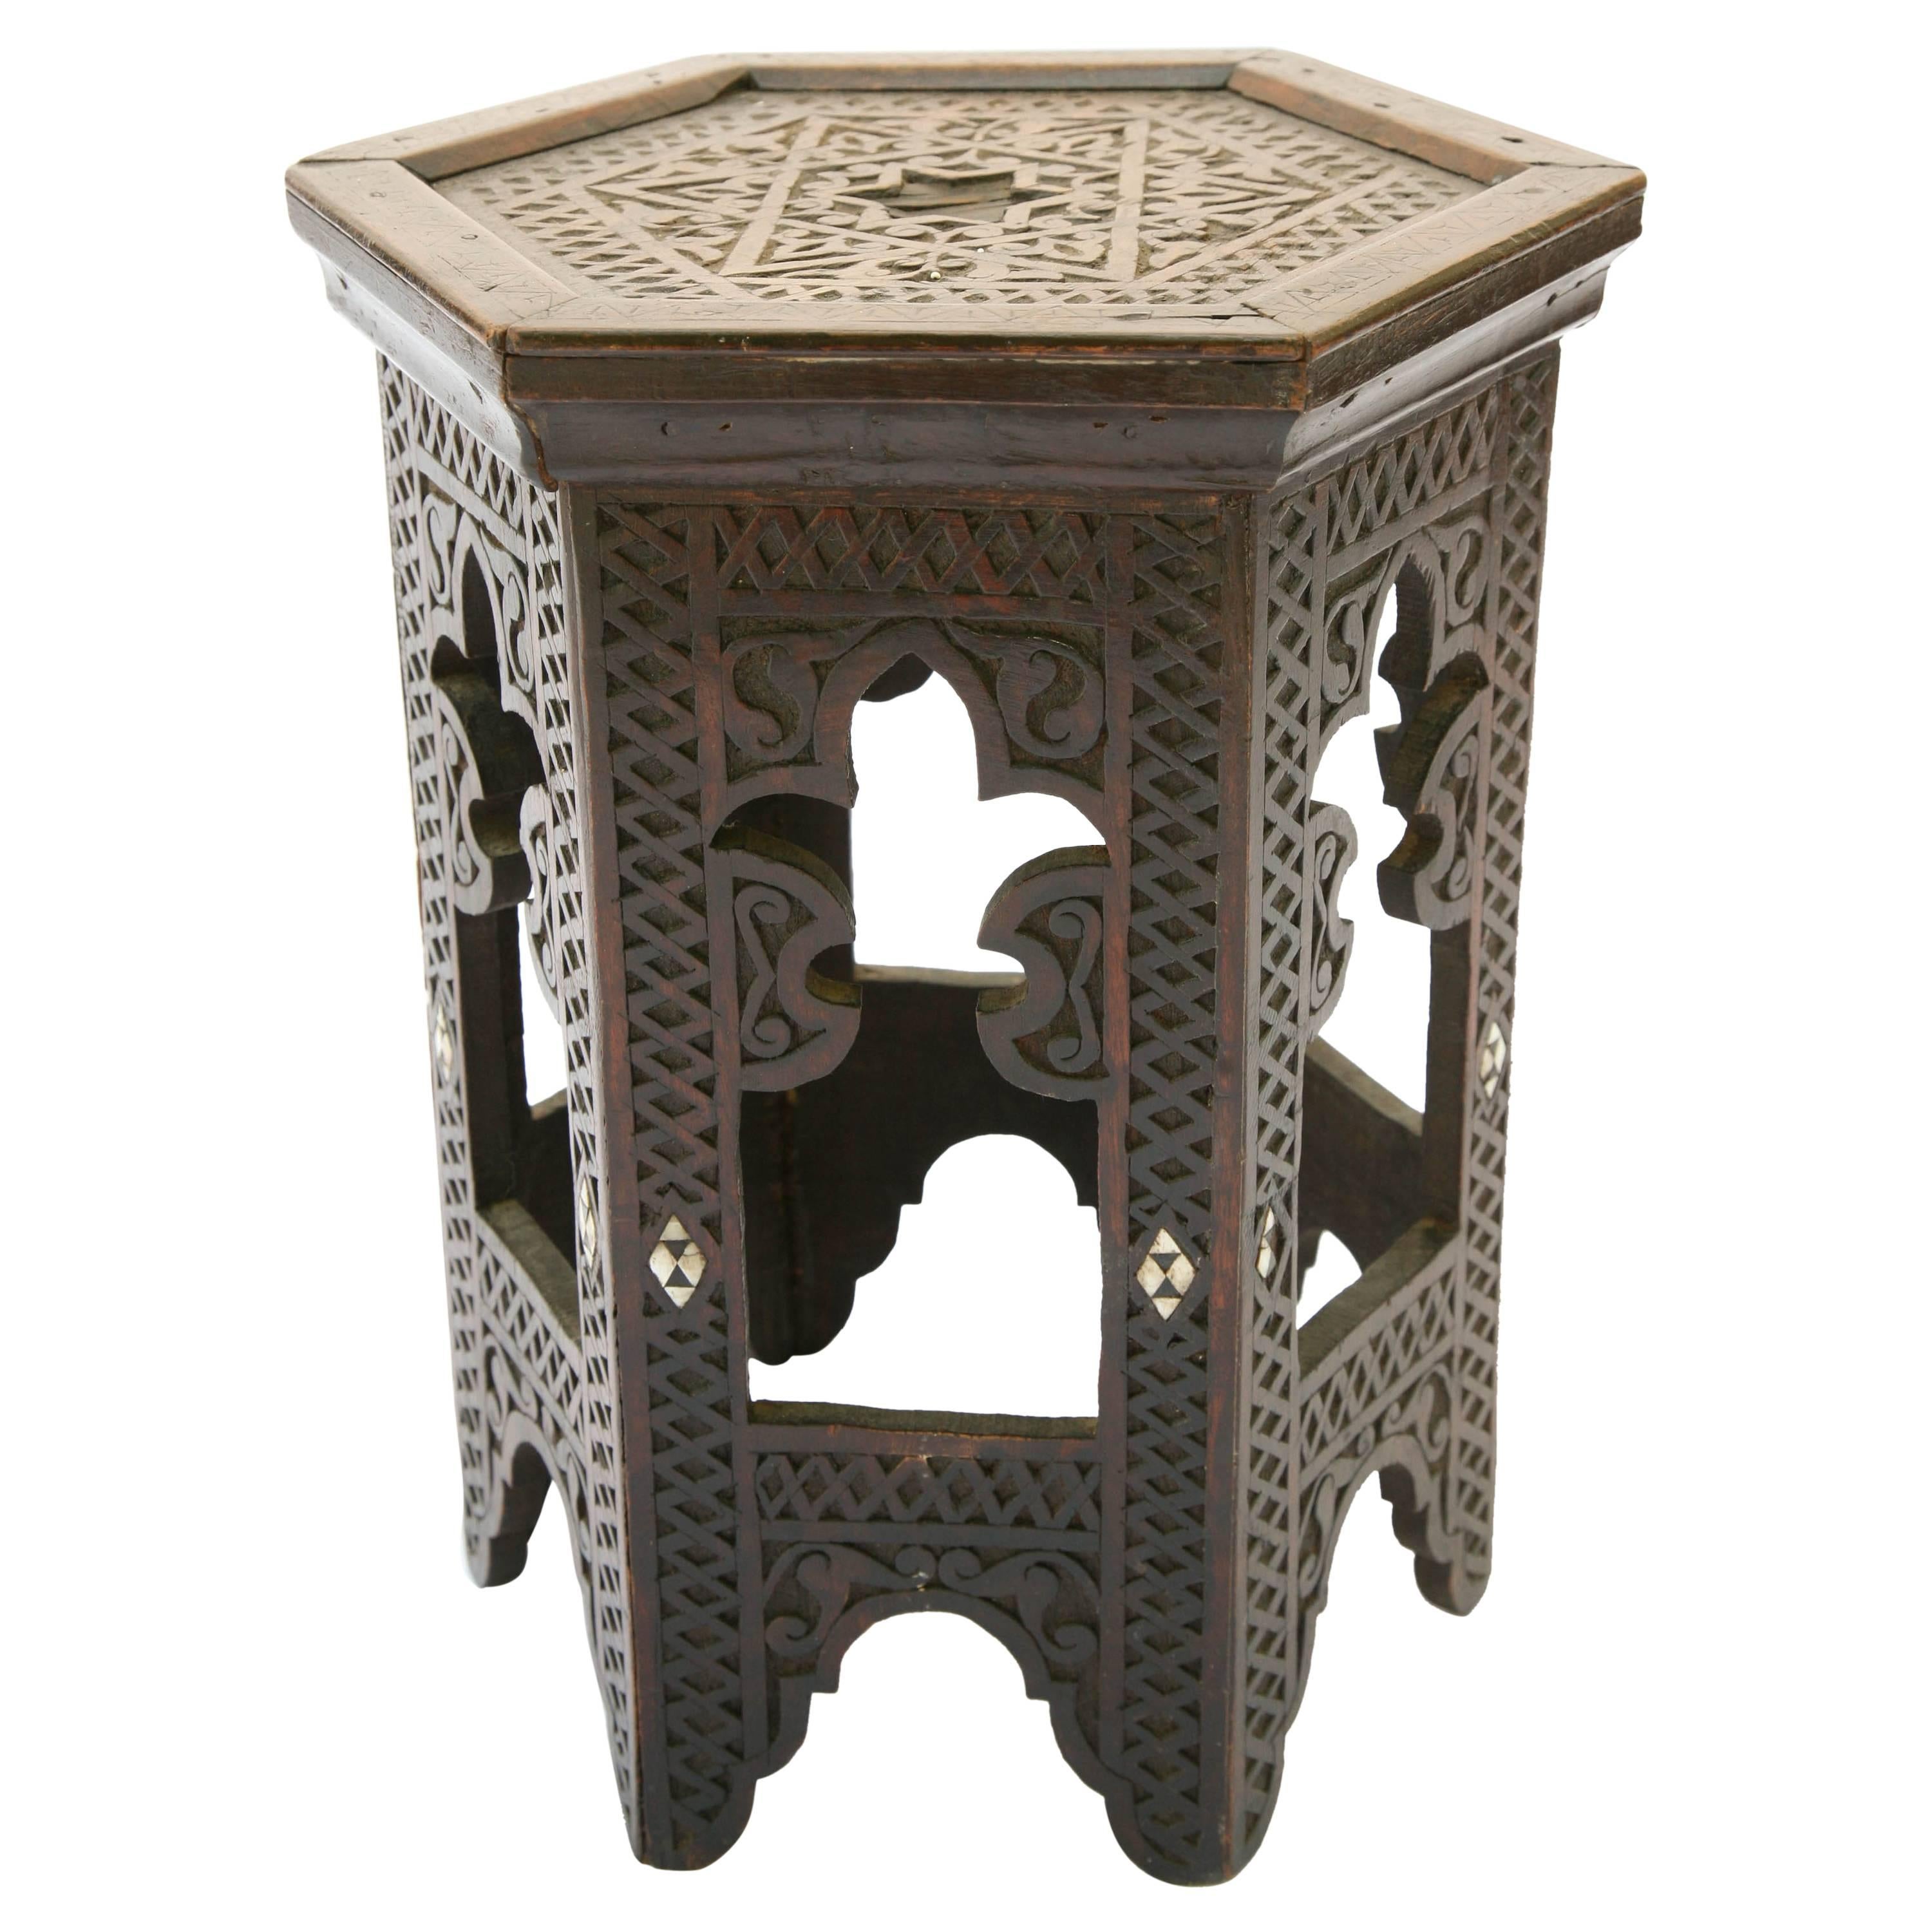 Anglo-Indian Accent Table